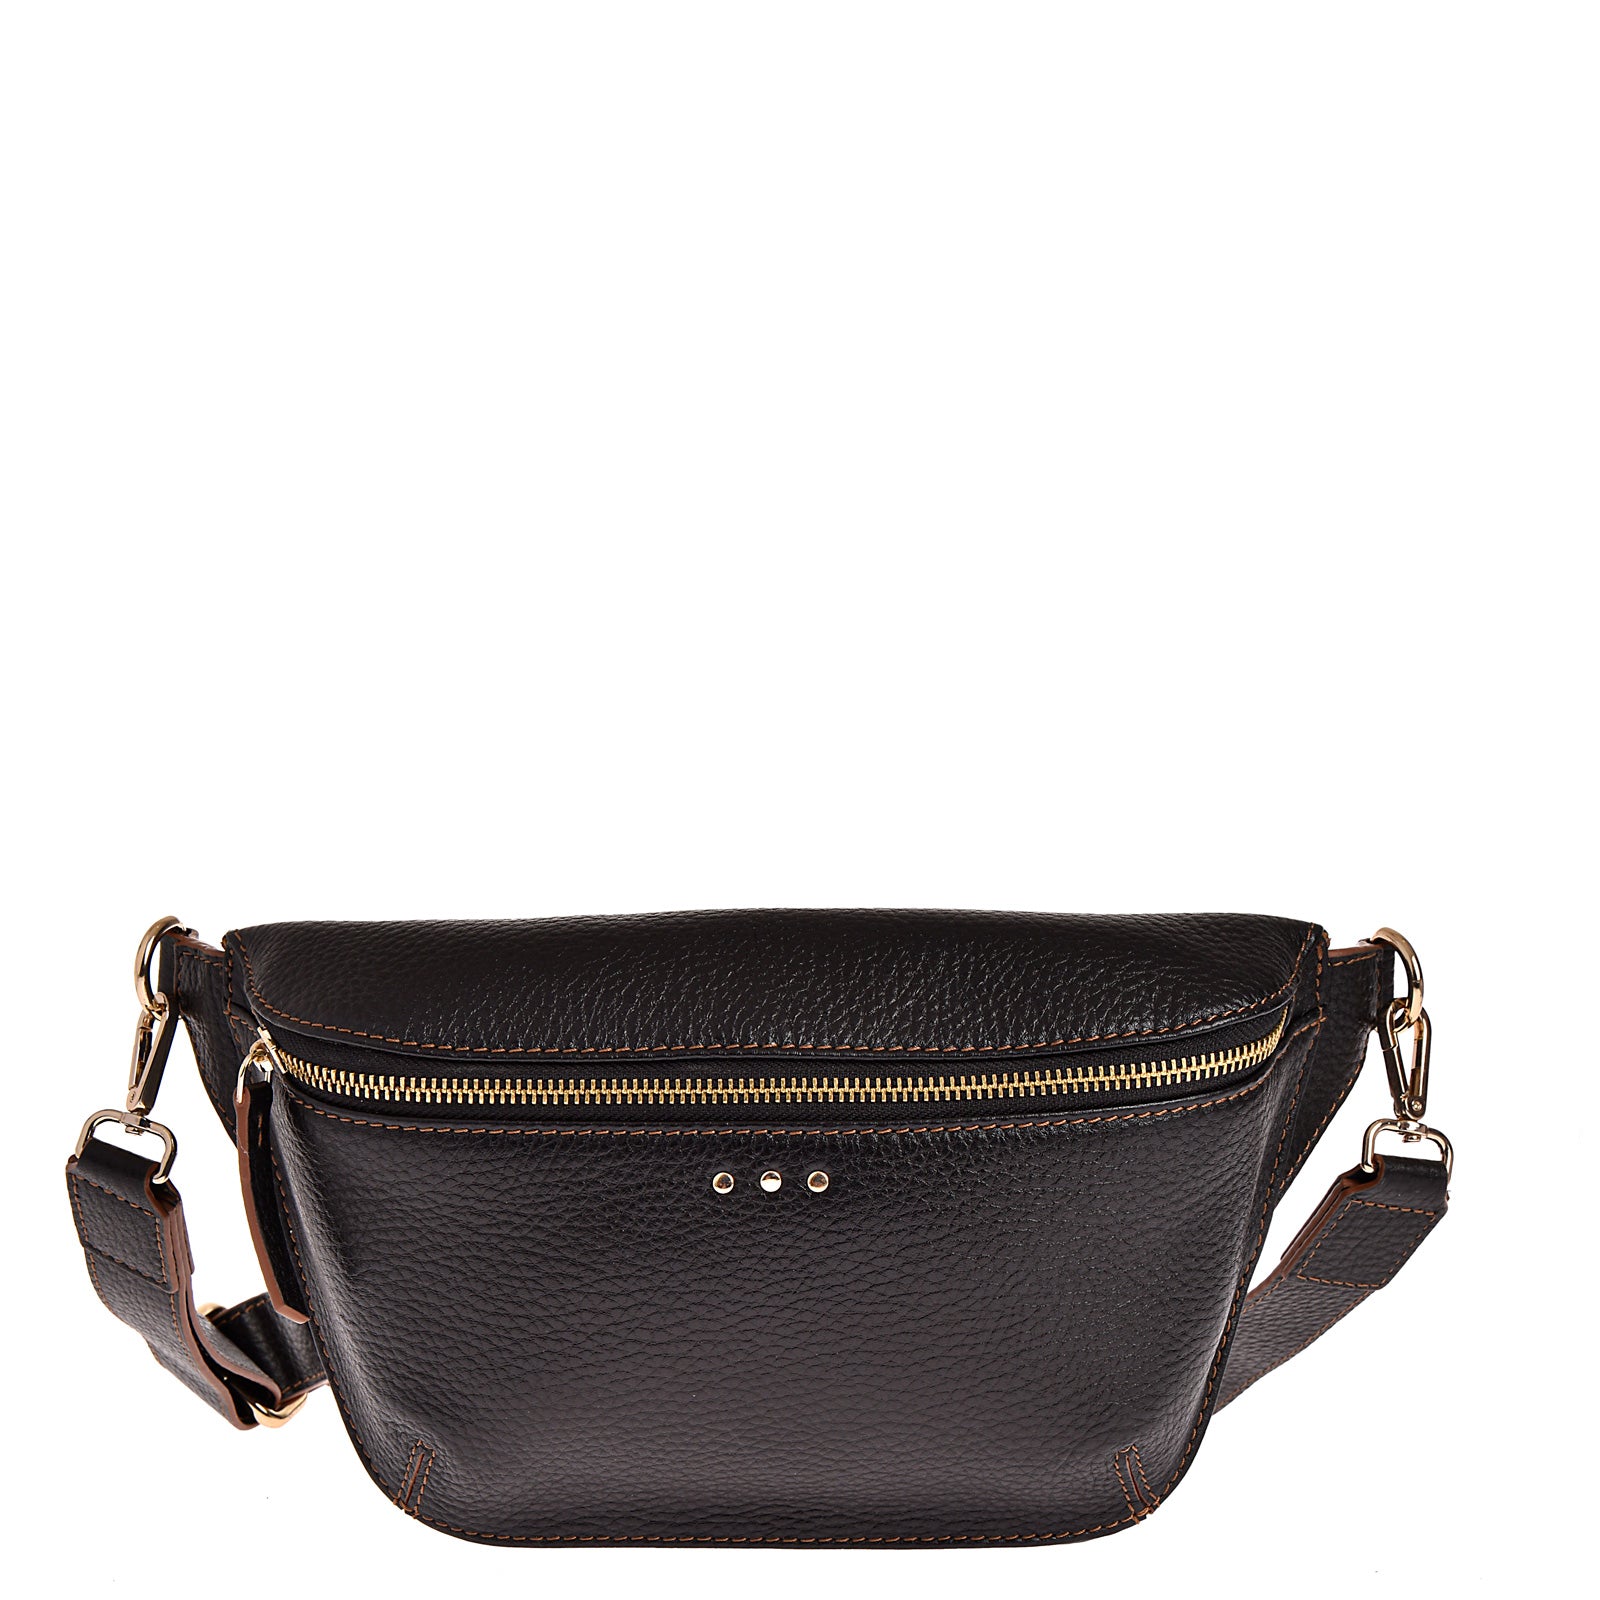 GAYA - Grained leather fanny pack